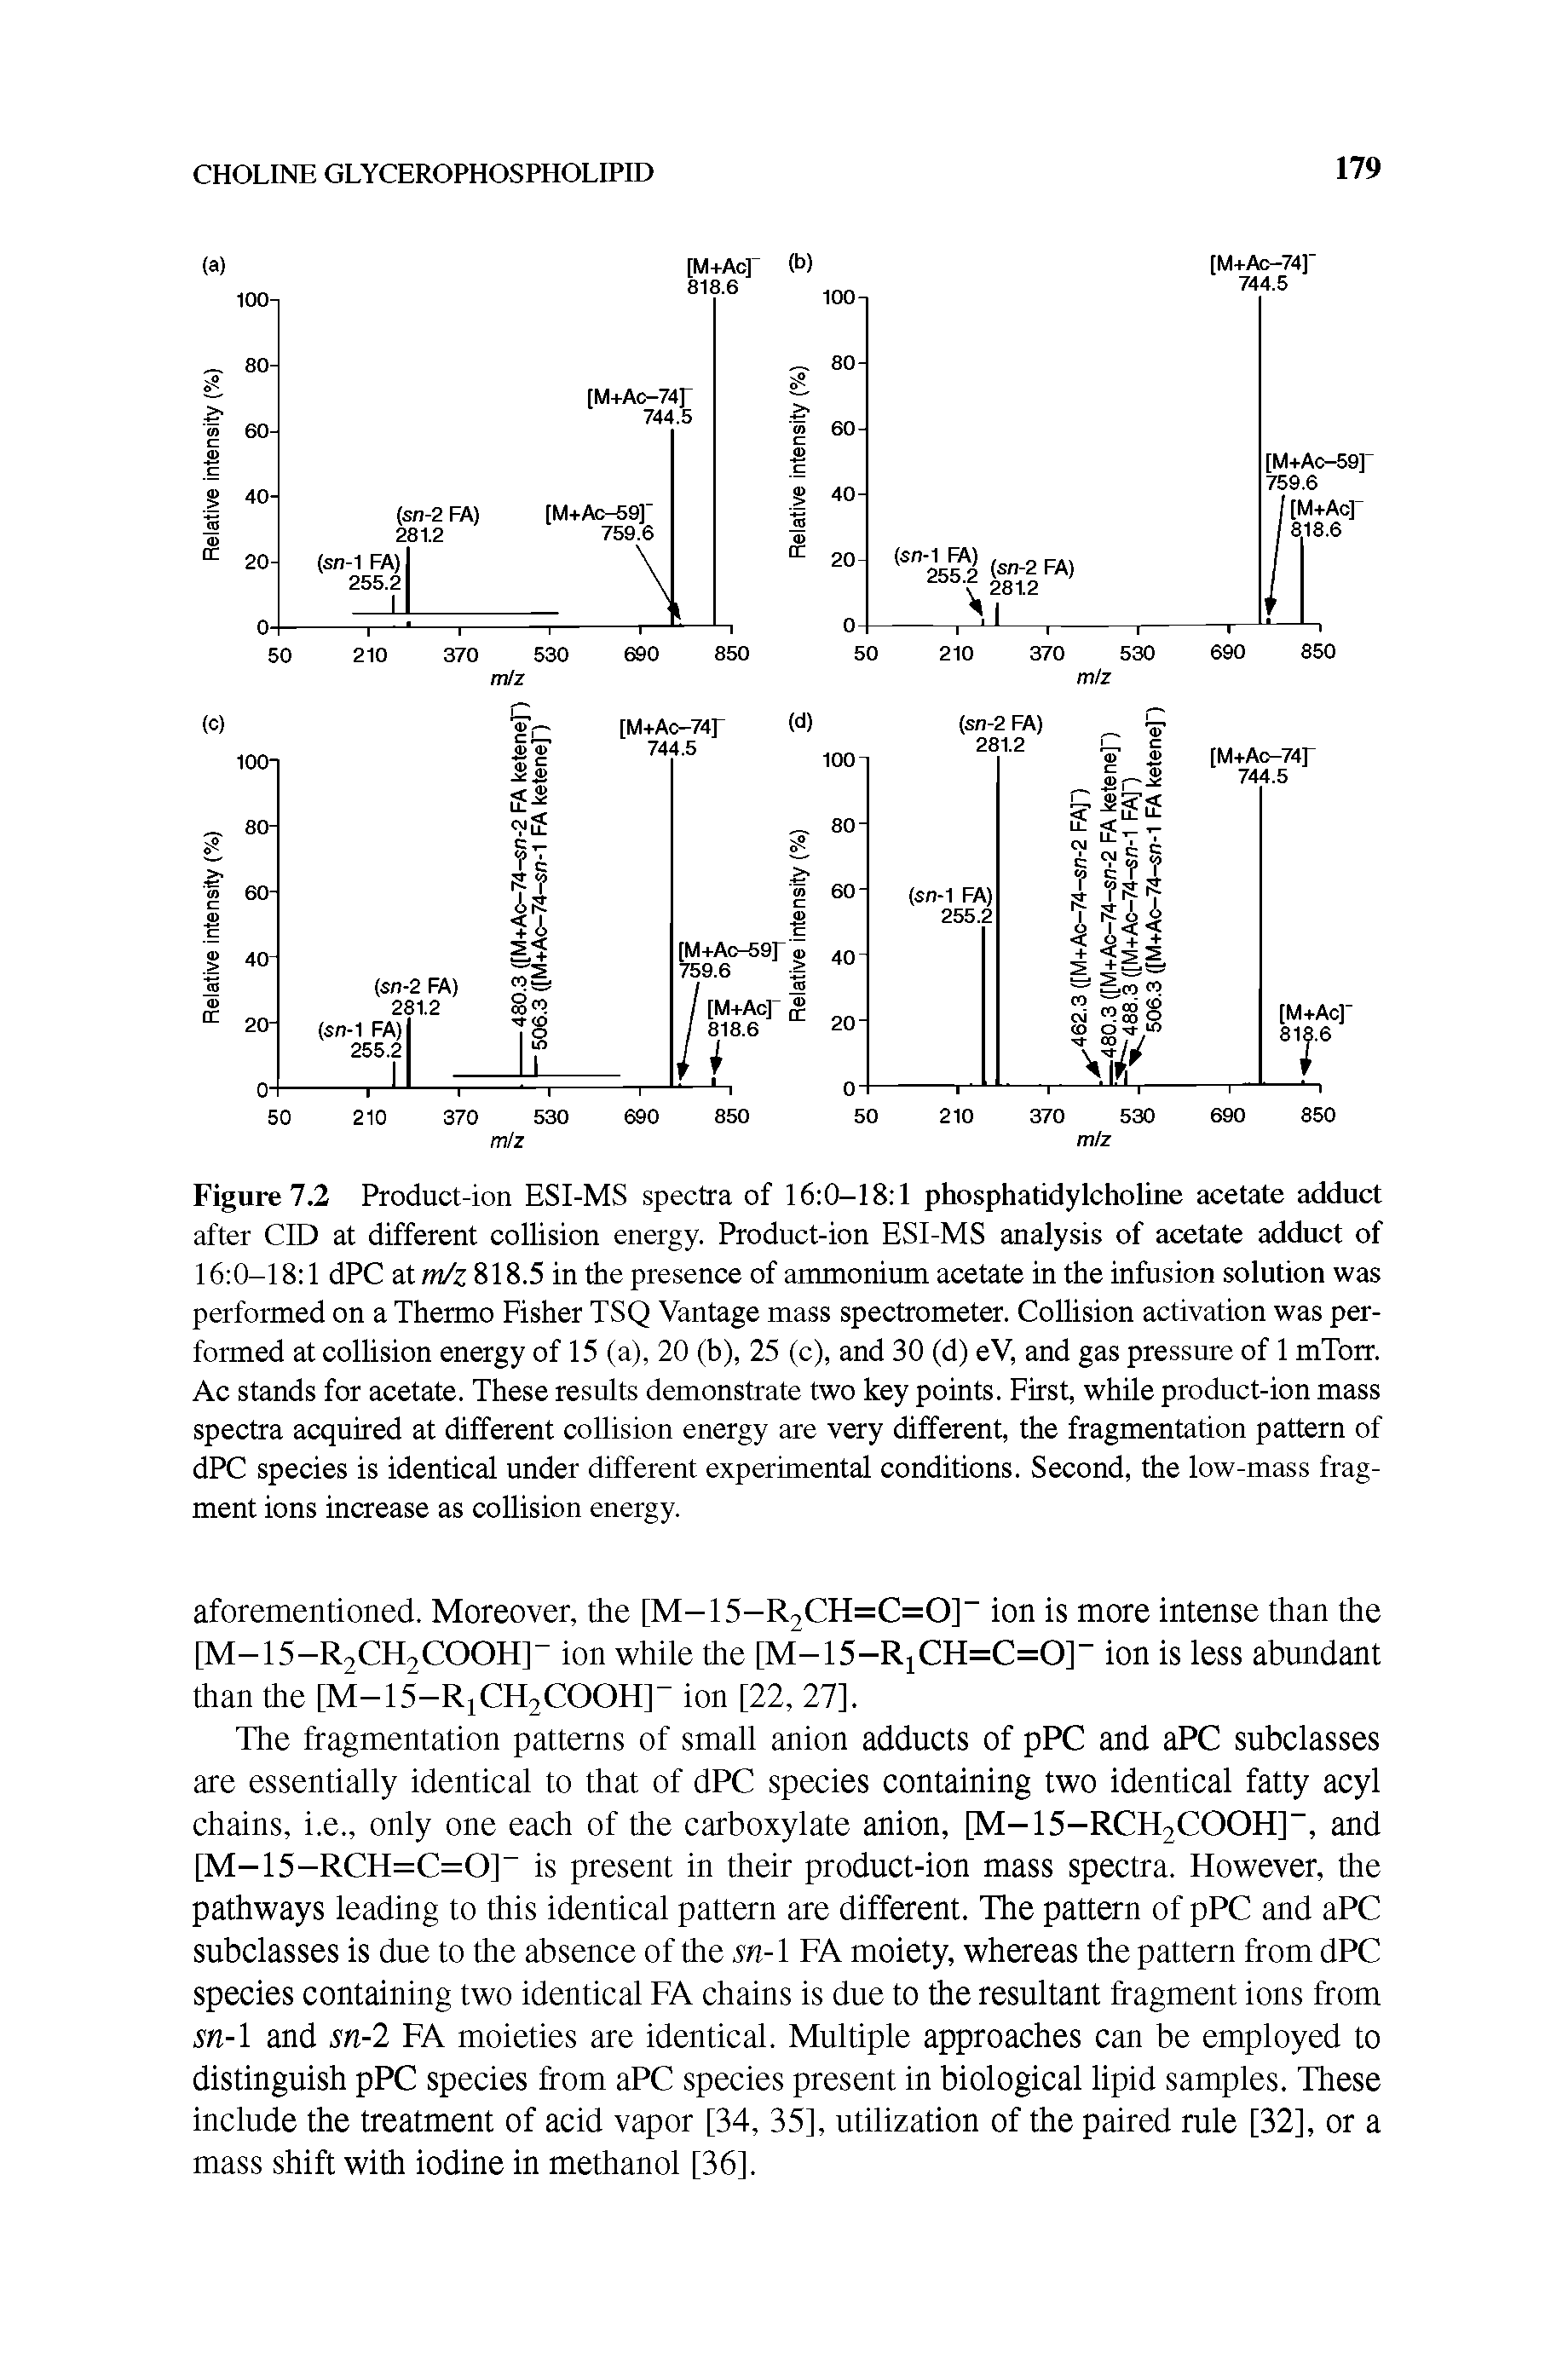 Figure 7.2 Product-ion ESI-MS spectra of 16 0-18 1 phosphatidylcholine acetate adduct after CID at different collision energy. Product-ion ESI-MS analysis of acetate adduct of 16 0-18 1 dPC at 2/z 818.5 in the presence of ammonium acetate in the infusion solution was performed on a Thermo Fisher TSQ Vantage mass spectrometer. Collision activation was performed at collision energy of 15 (a), 20 (b), 25 (c), and 30 (d) eV, and gas pressnre of 1 mTorr. Ac stands for acetate. These resnlts demonstrate two key points. First, while product-ion mass spectra acquired at different collision energy are very different, the fragmentation pattern of dPC species is identical under different experimental conditions. Second, the low-mass fragment ions increase as collision energy.